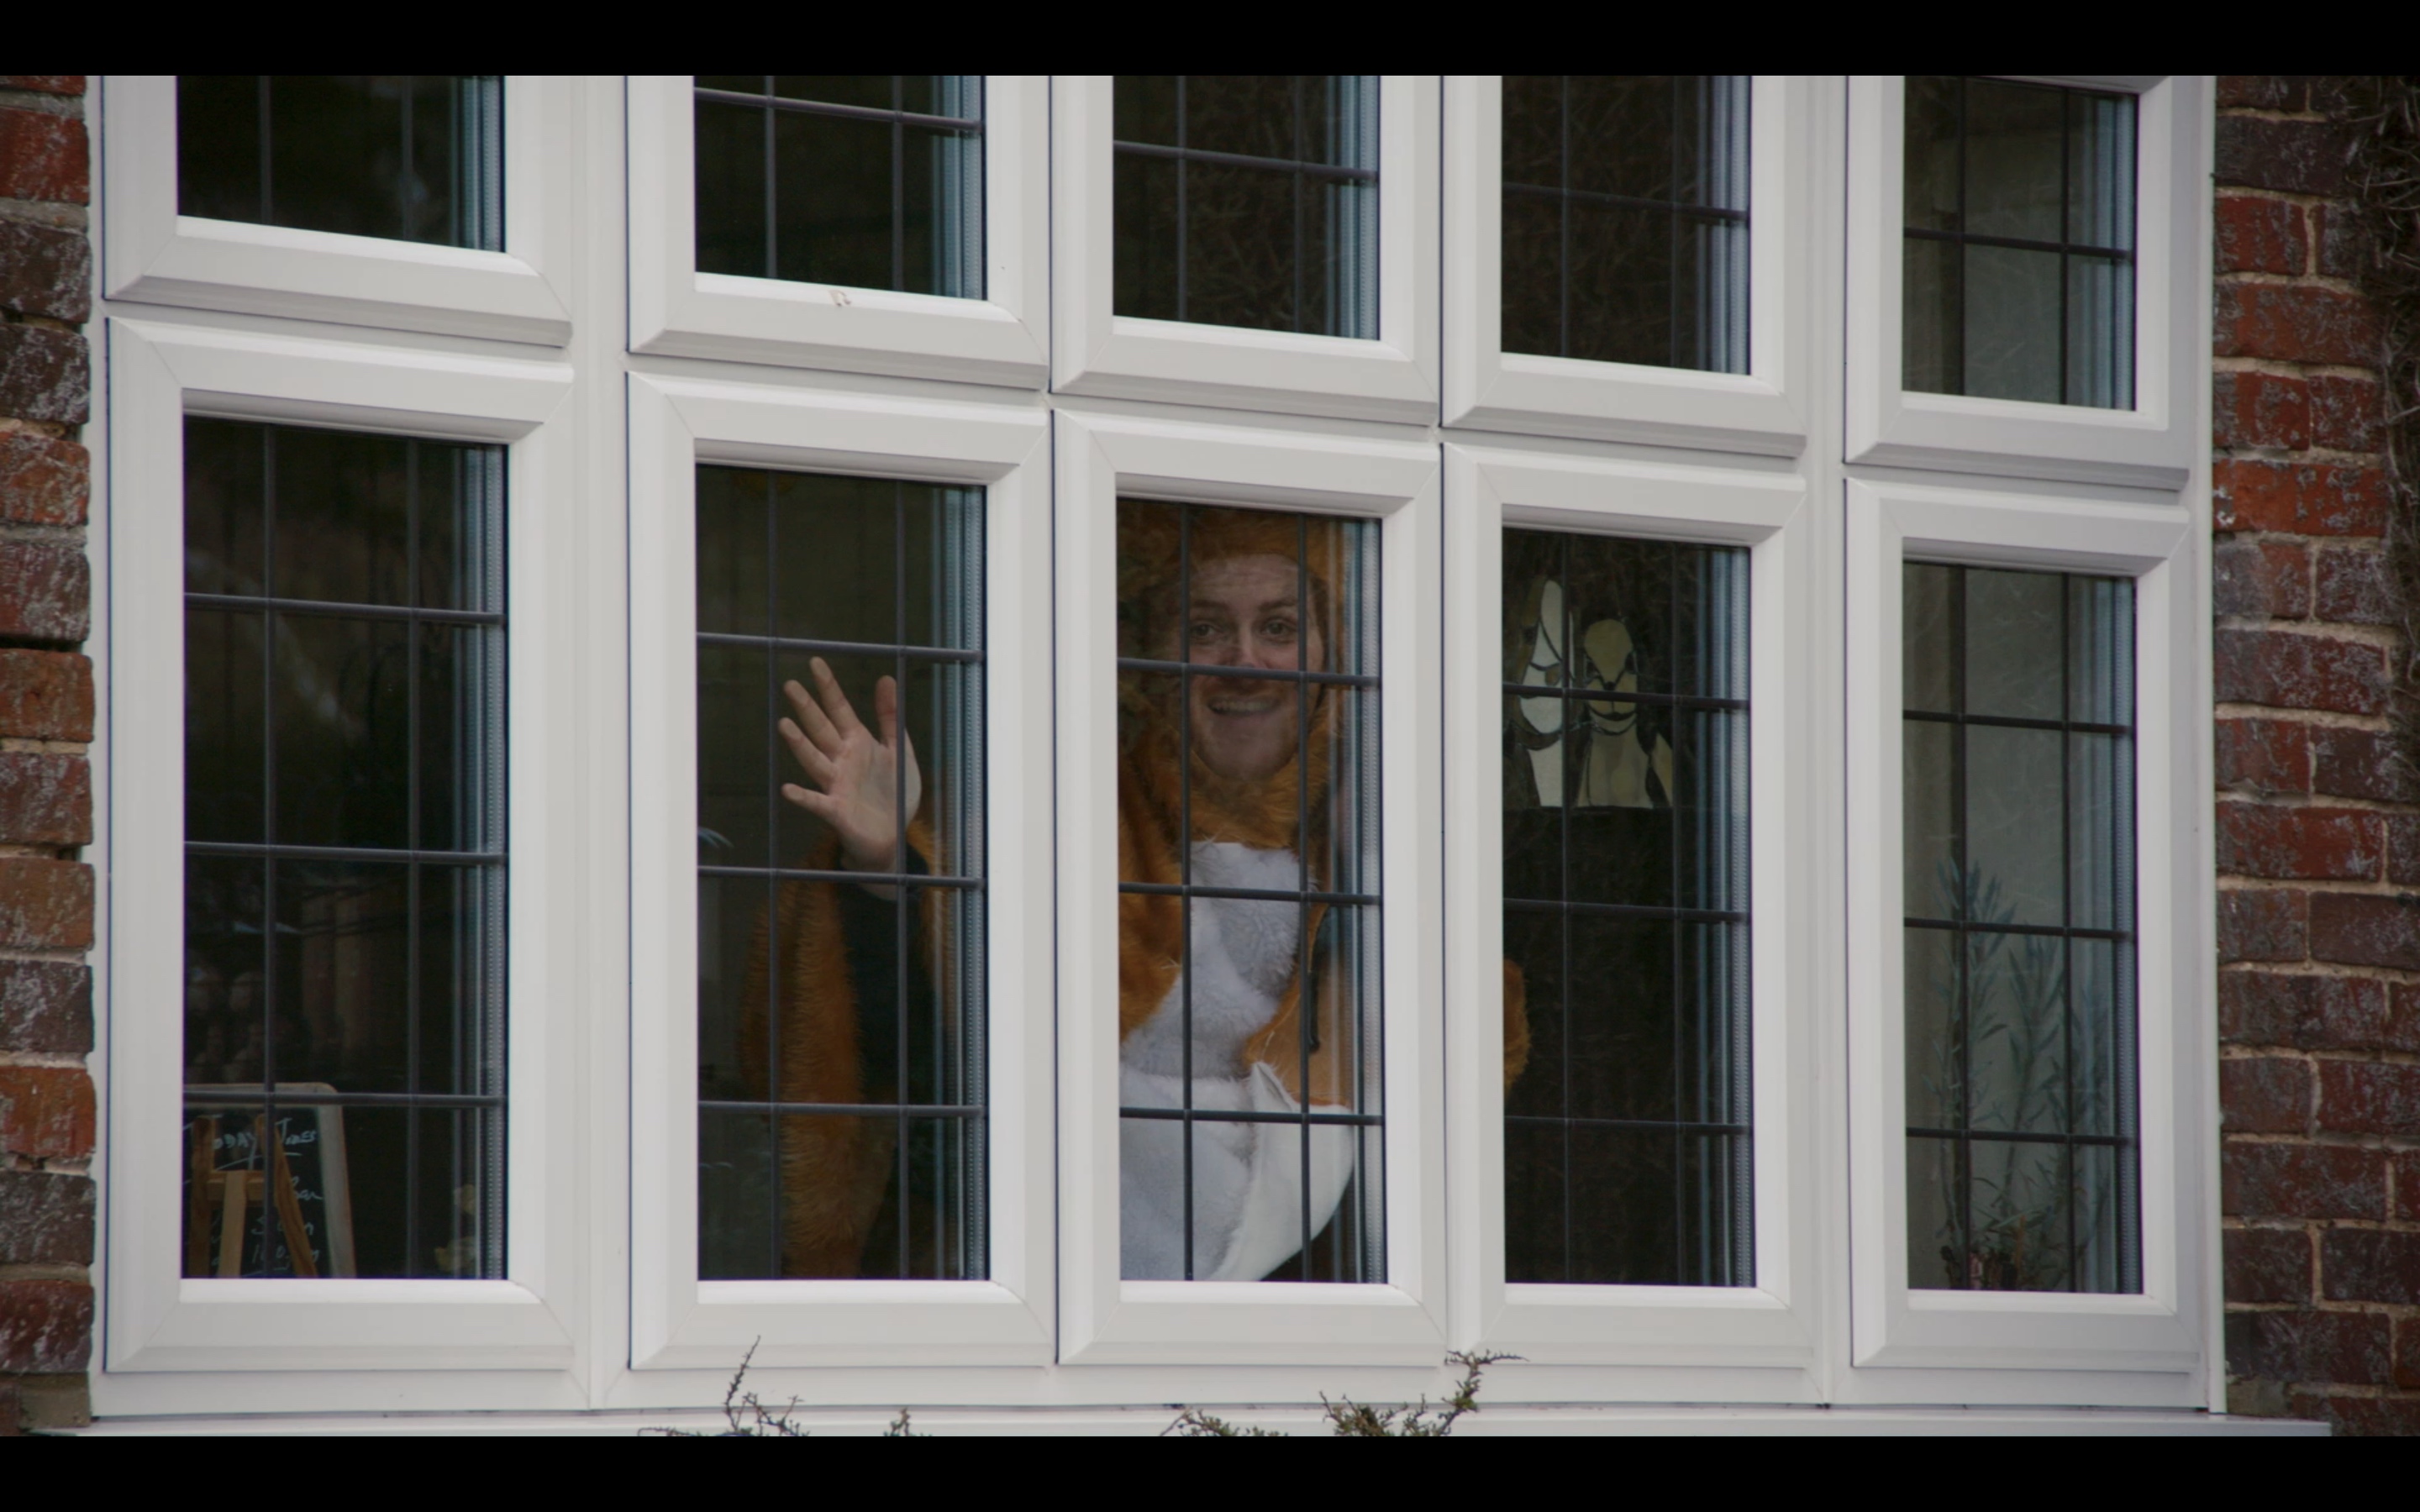 An image link to an extract from a short film in mockumentary style, directed by Finlay Renton featuring a character looking through a window.